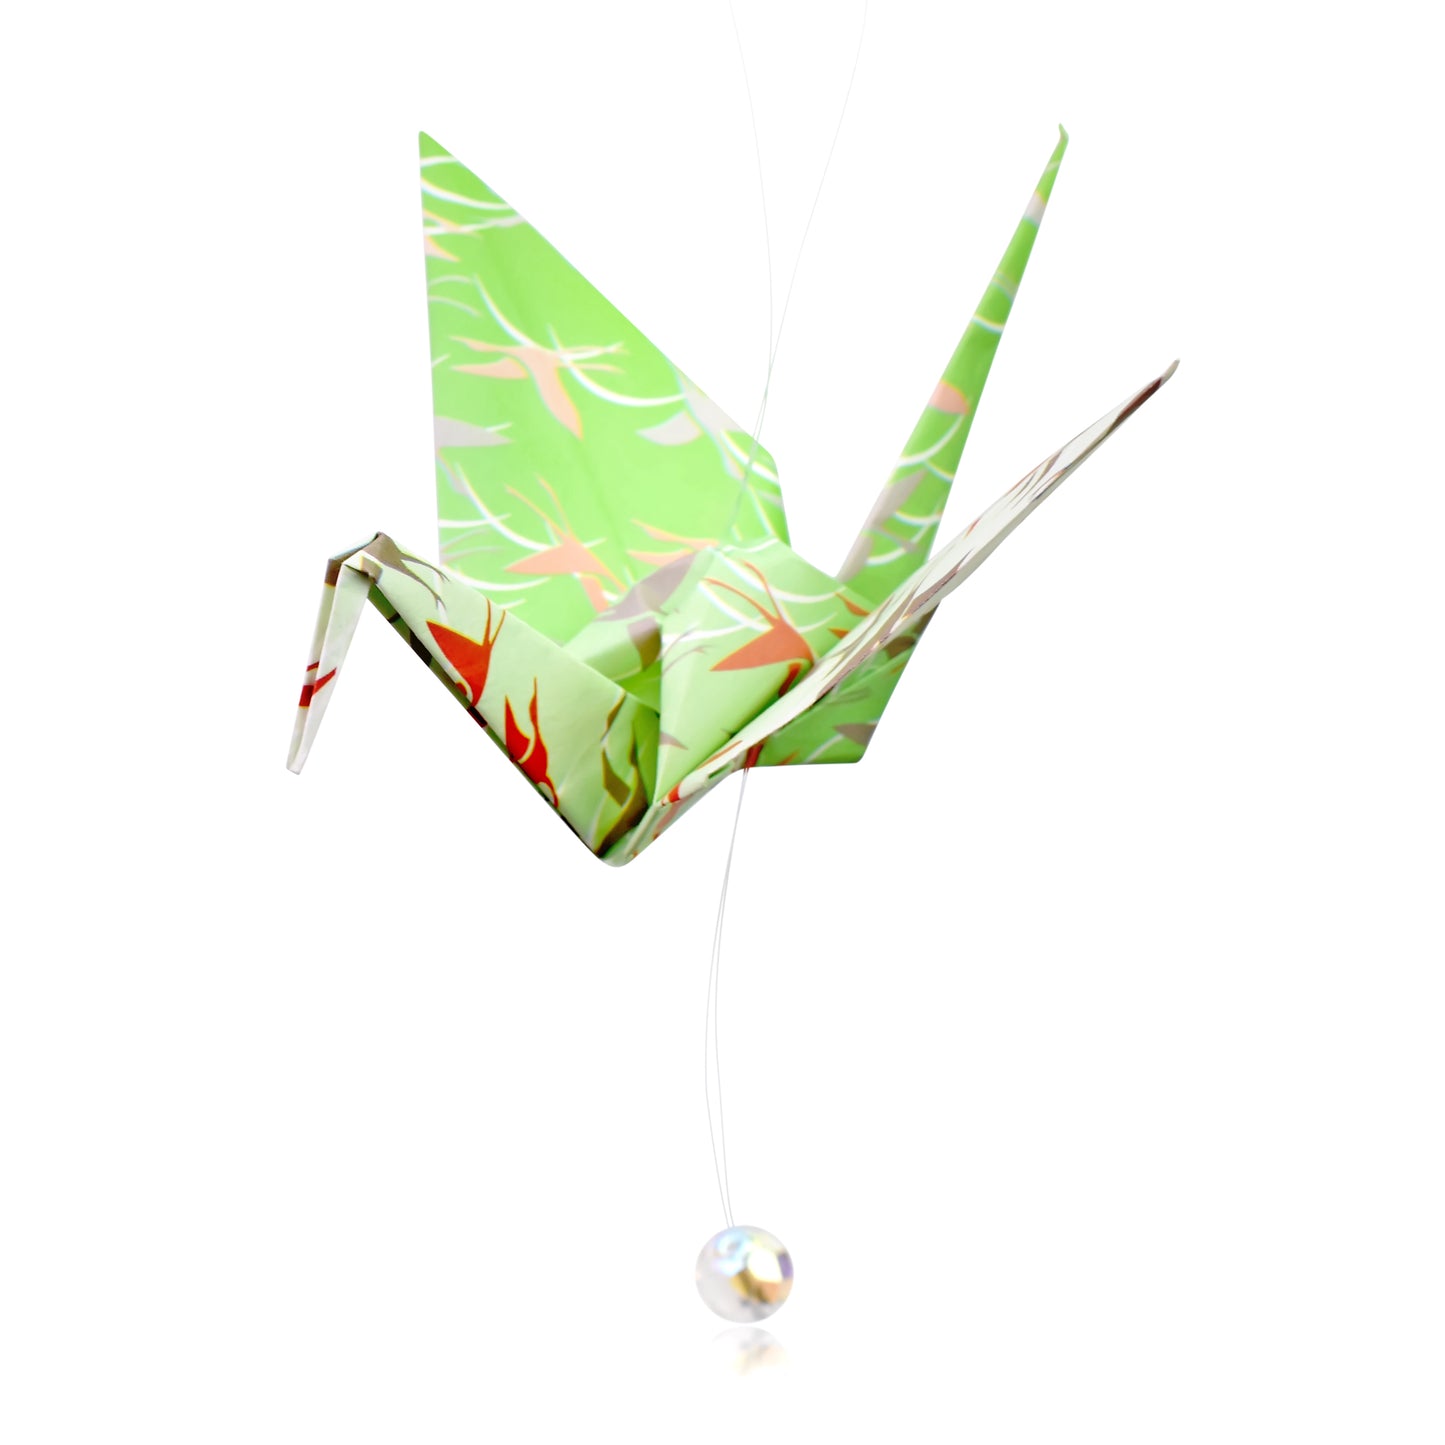 Give the Perfect Birthday Gift with Origami Cranes and June Birthstone